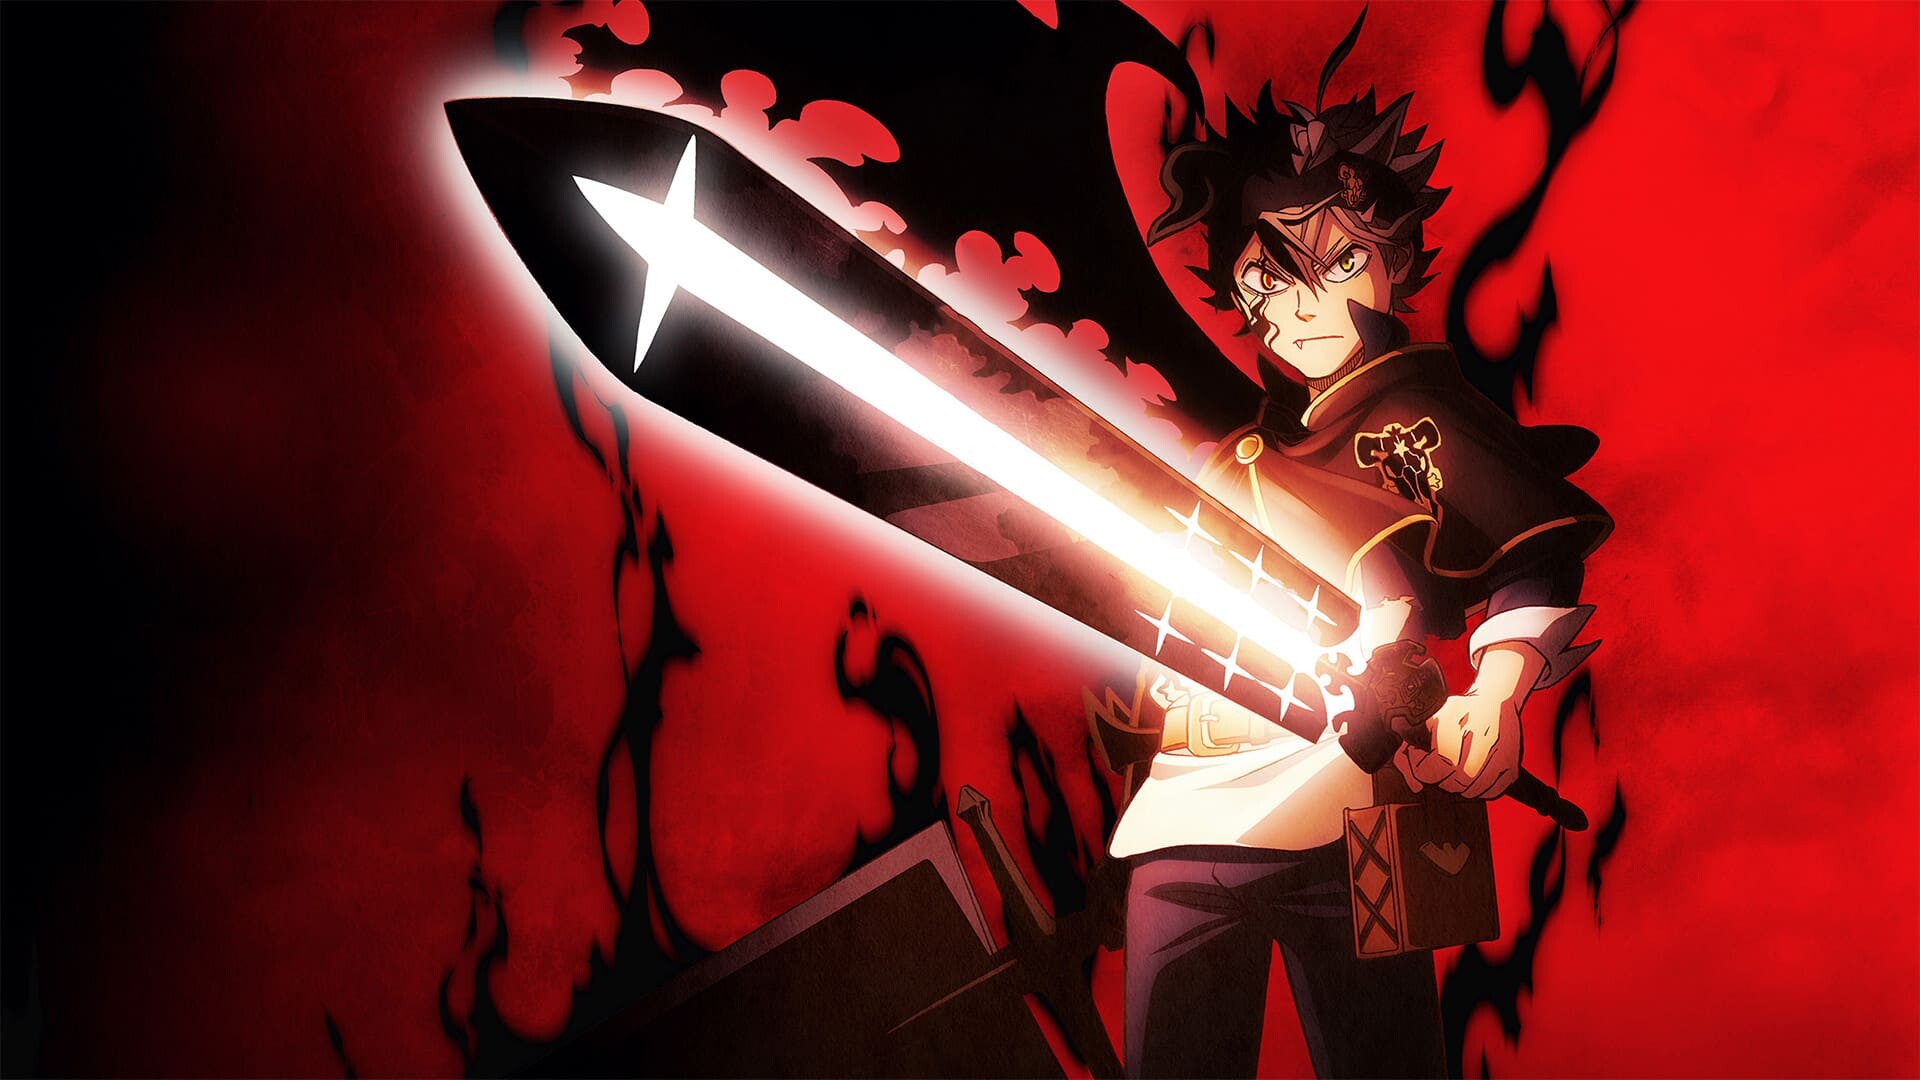 Black Clover: A fantasy shounen anime about a magicless boy named Asta in a world where everyone has magic who wants to become the Wizard King. 1920x1080 Full HD Background.